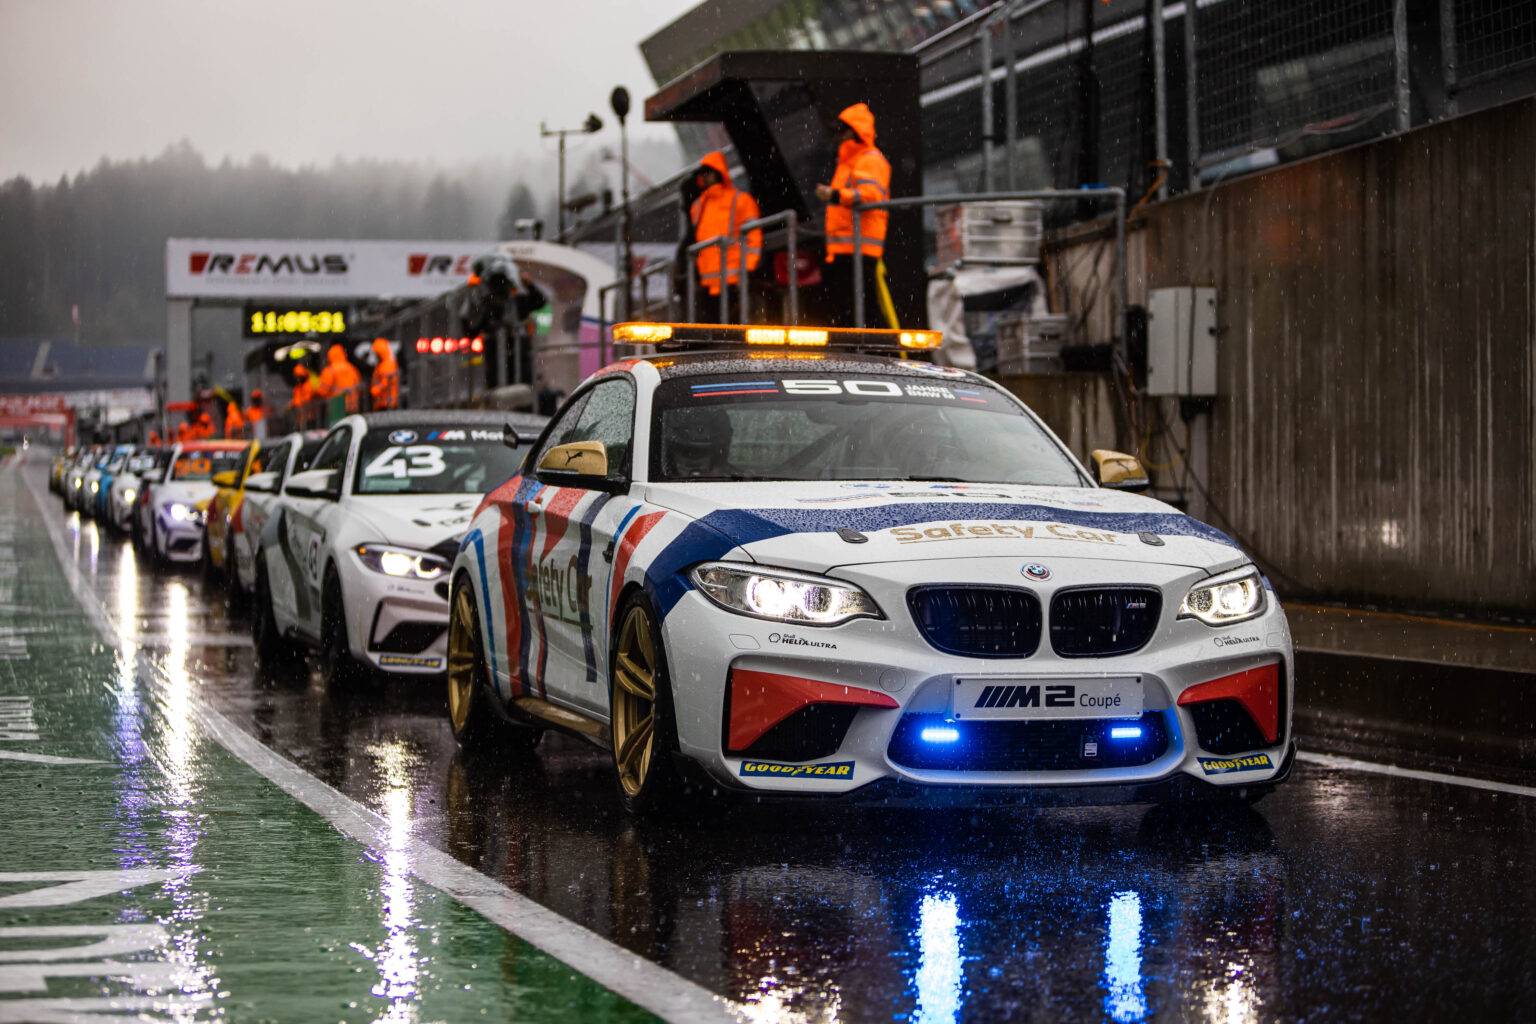 Pouring rain prevents second race at the Red Bull Ring